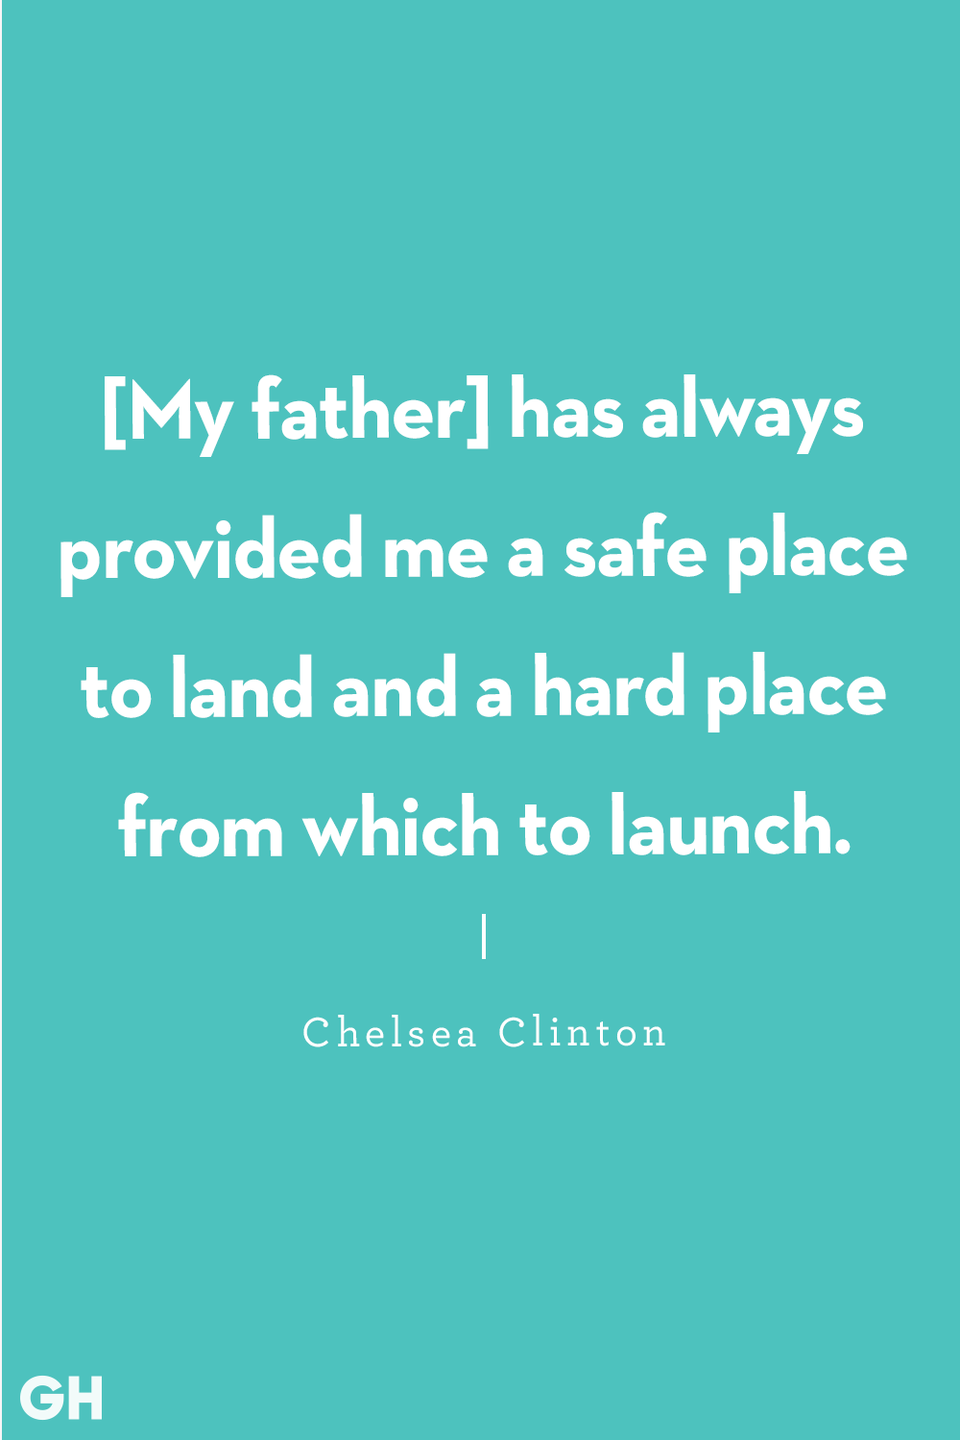 <p>“[My father] has always provided me a safe place to land and a hard place from which to launch.”</p>